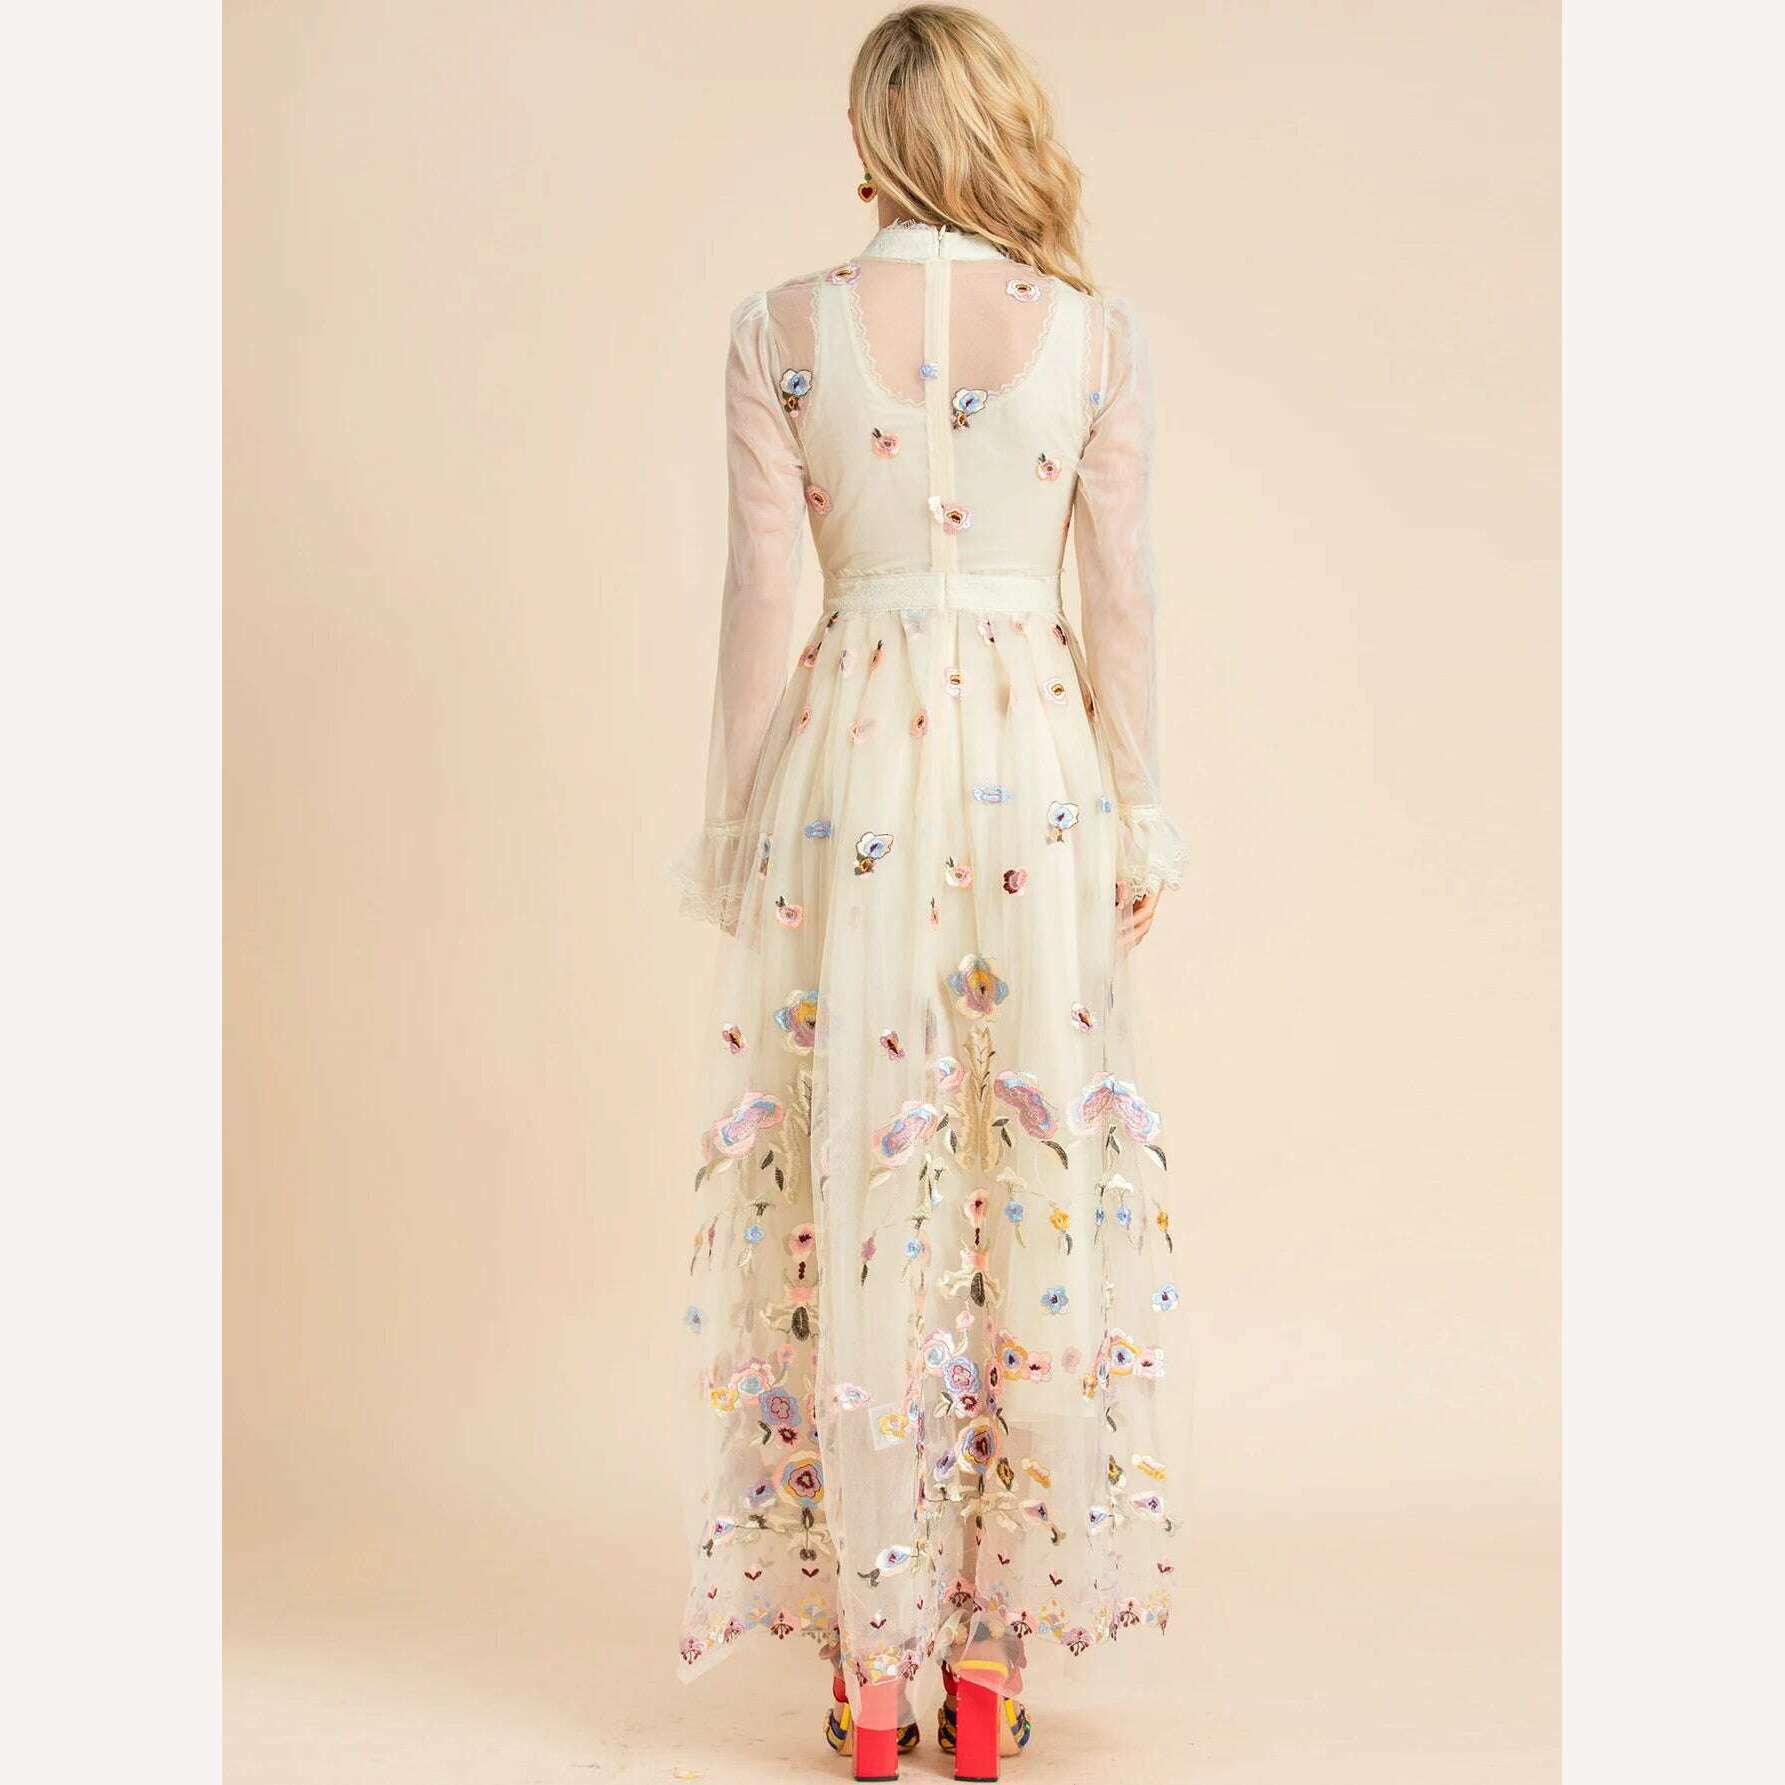 KIMLUD, LD LINDA DELLA 2022 Summer Runway Maxi Vintage Party Dress Women's Stand collar Flare Sleeve Mesh Flowers Embroidery Long Dress, KIMLUD Women's Clothes